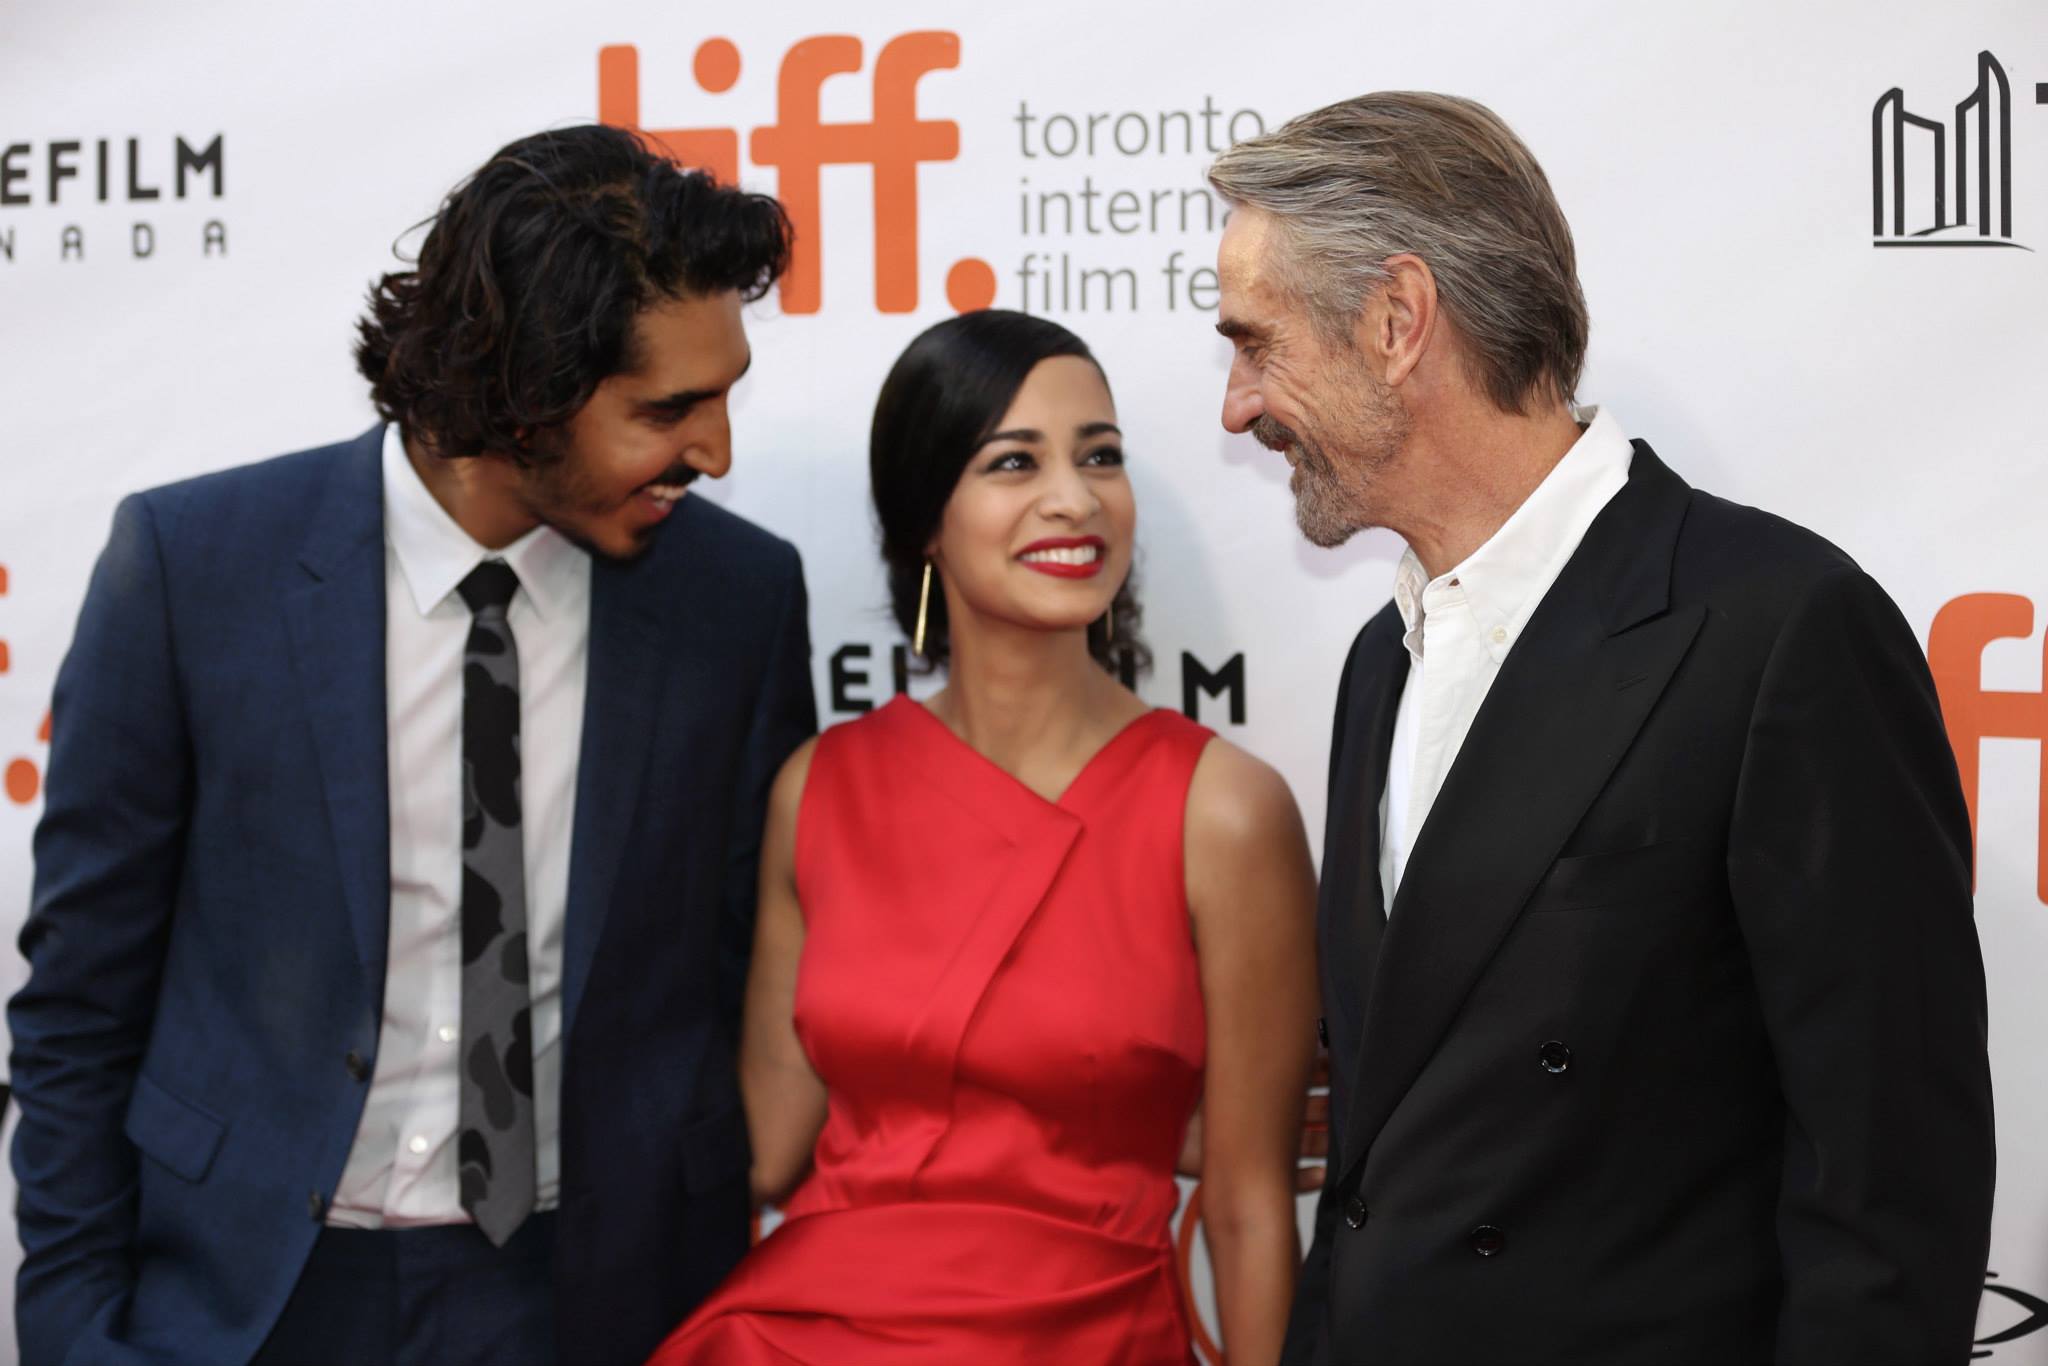 Dev Patel, Devika Bhise, and Jeremy Irons at the Toronto International Film Festival for the global premiere of The Man Who Knew Infinity